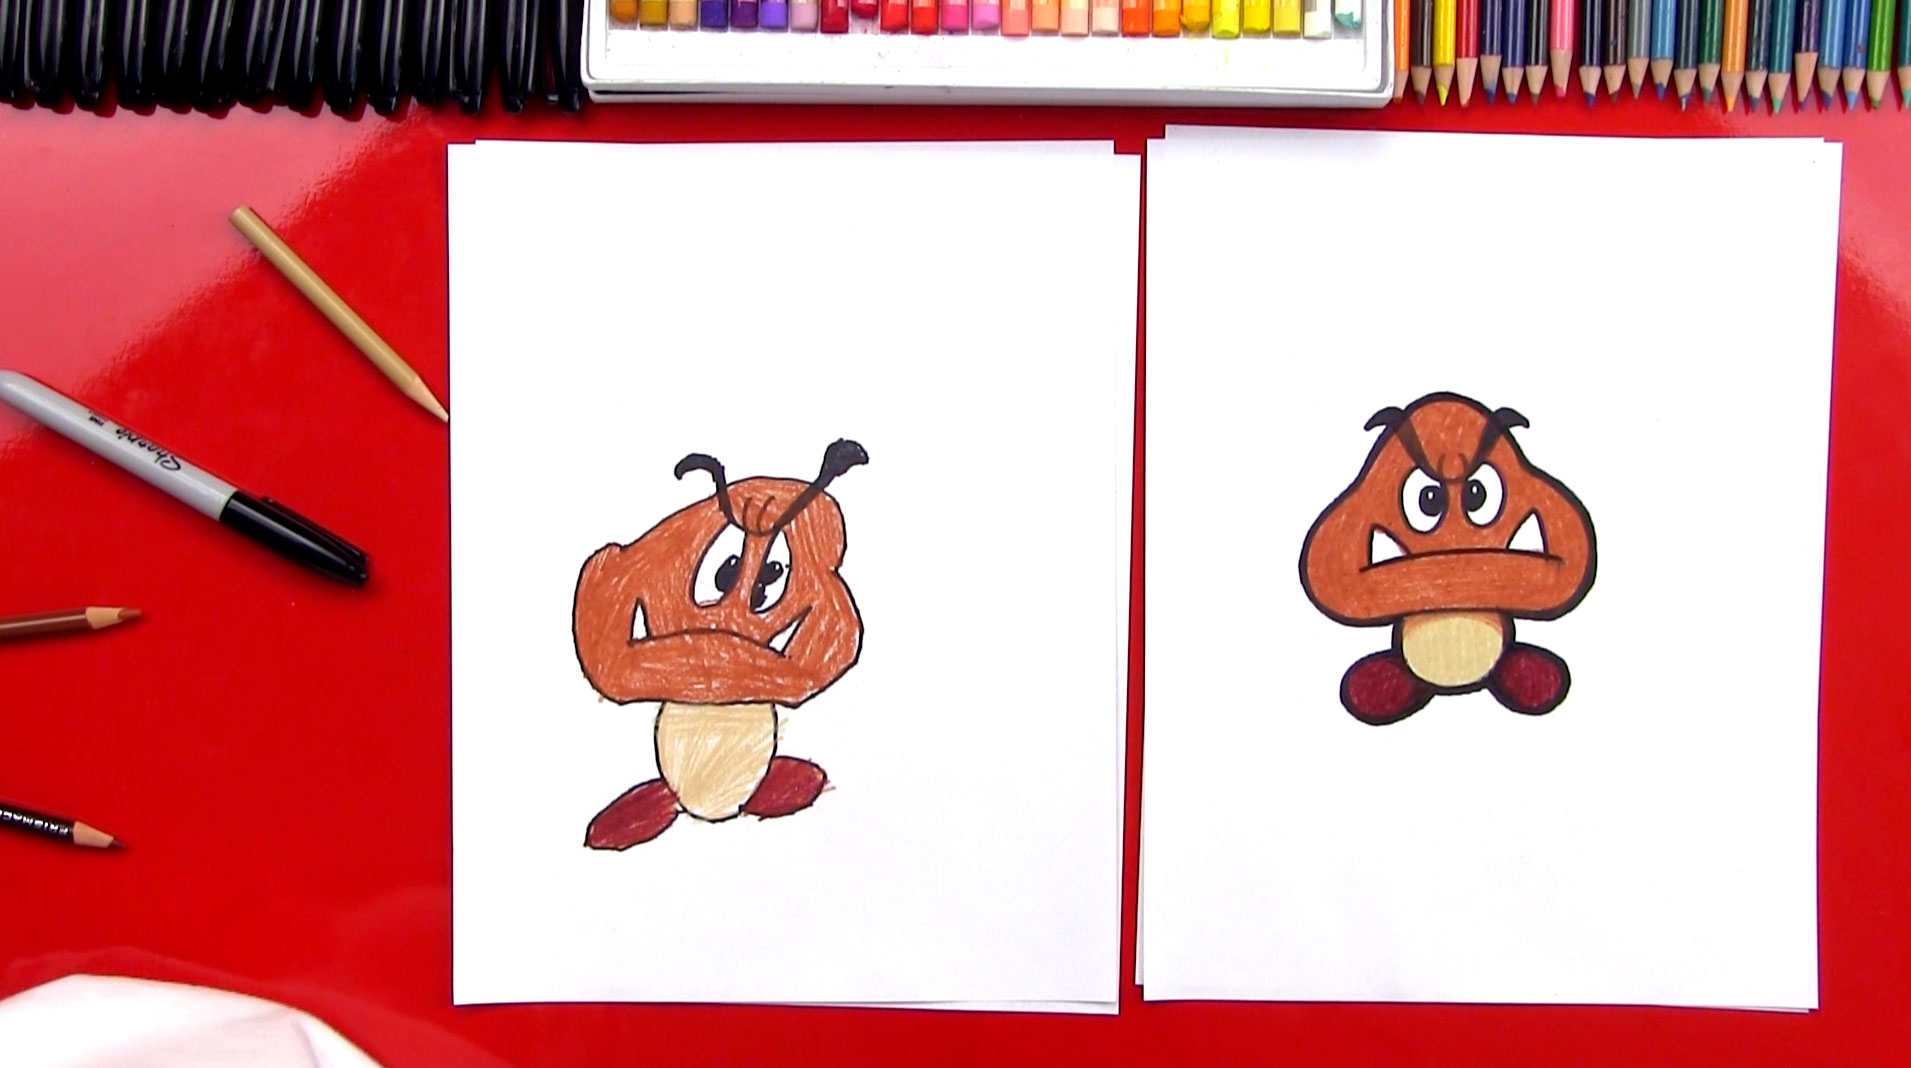 How To Draw A Goomba From Mario Bros - Art For Kids Hub